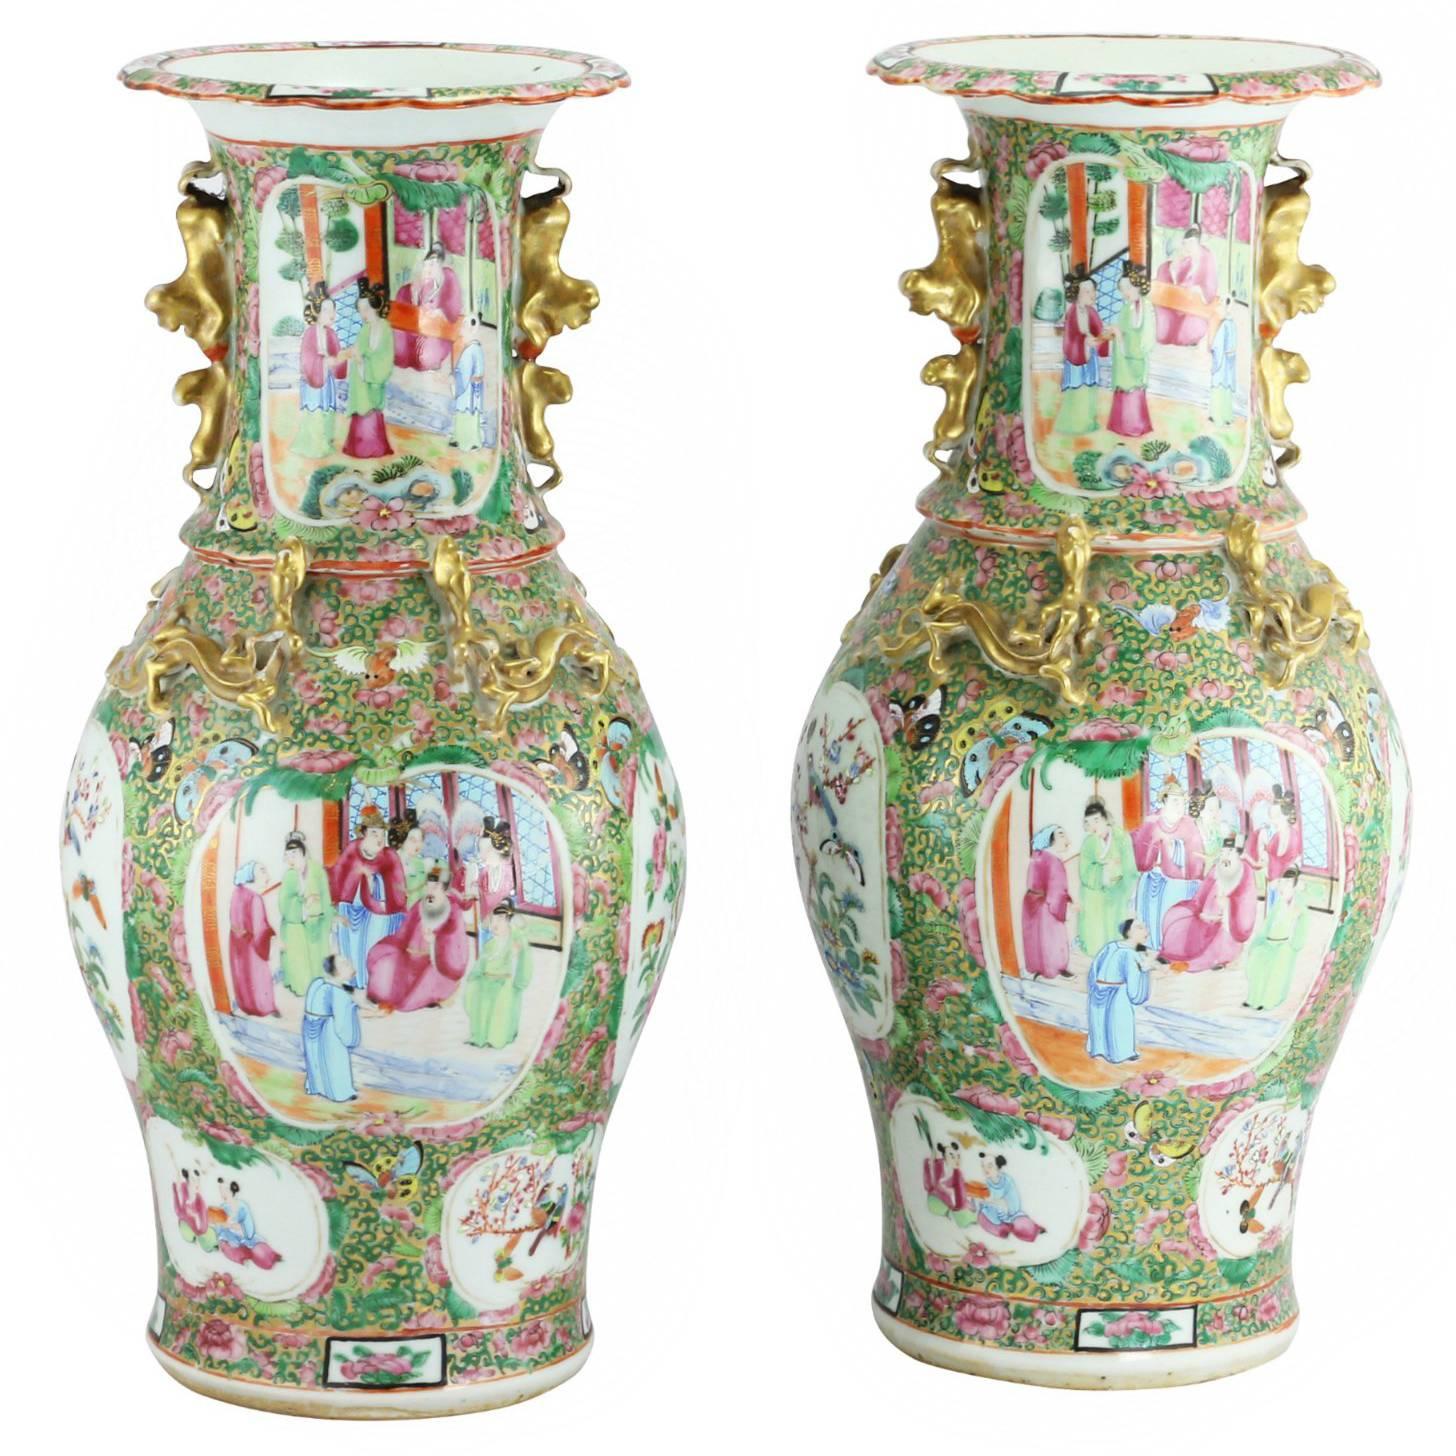 Pair of 19th Century Chinese Qing Dynasty Famille Rose Vases